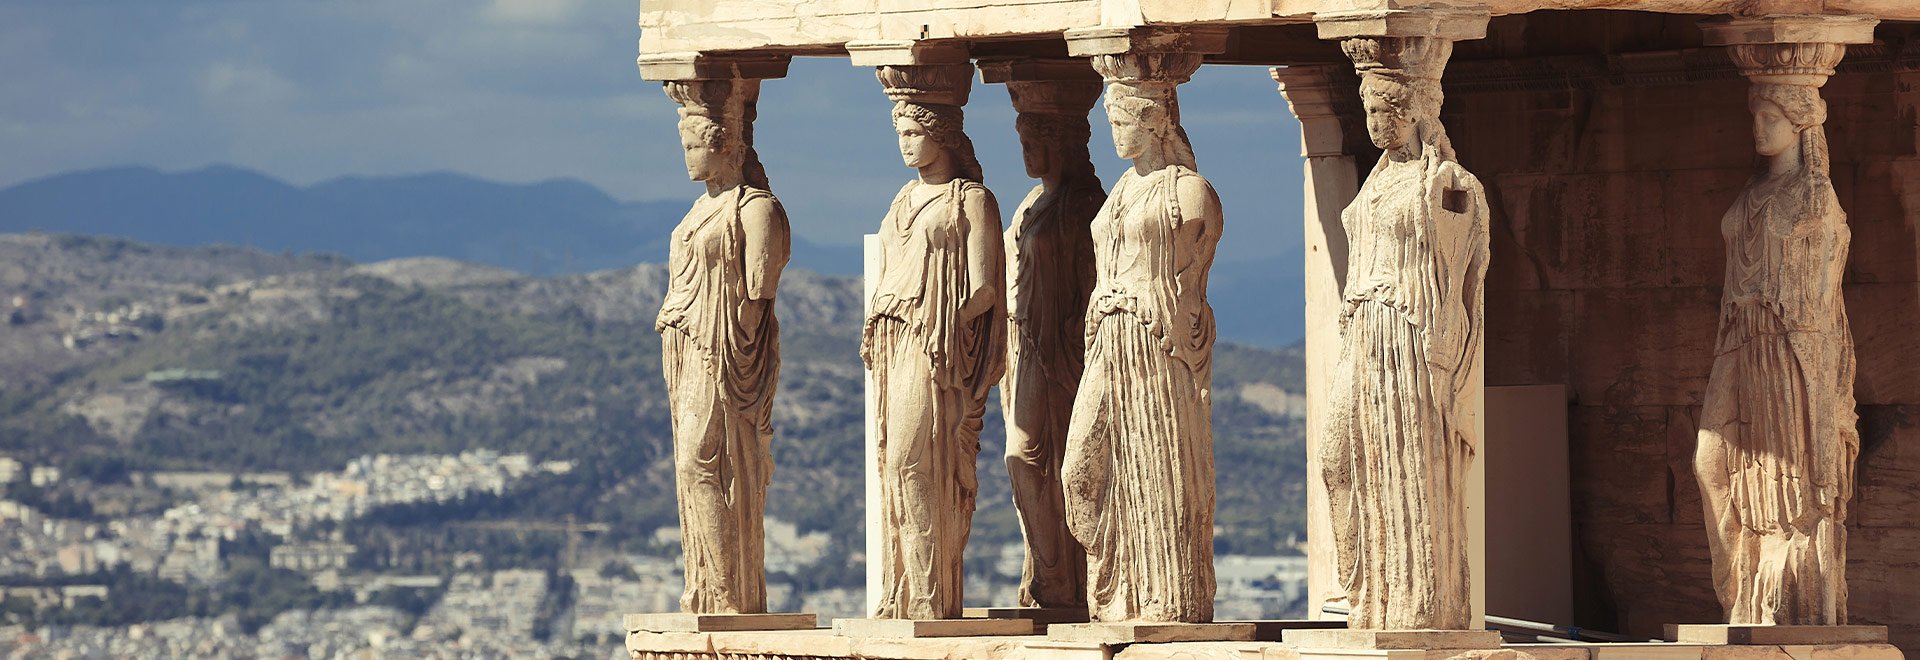 Wings Ancient World Greece Athens Acropolis MH